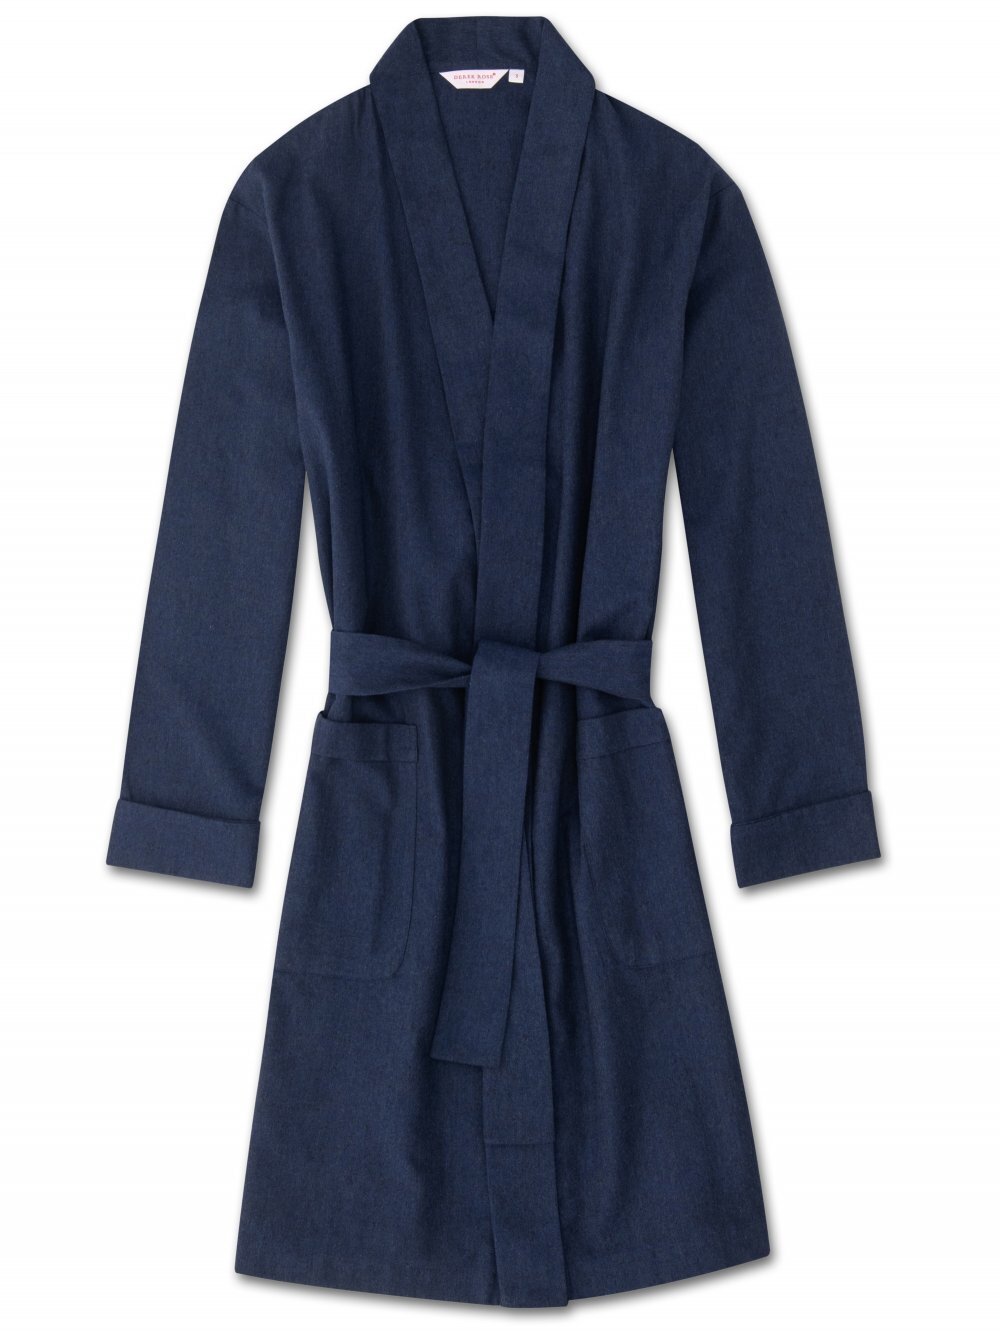 womens_dressing_gown_balmoral_3_brushed_cotton_navy_main.jpg